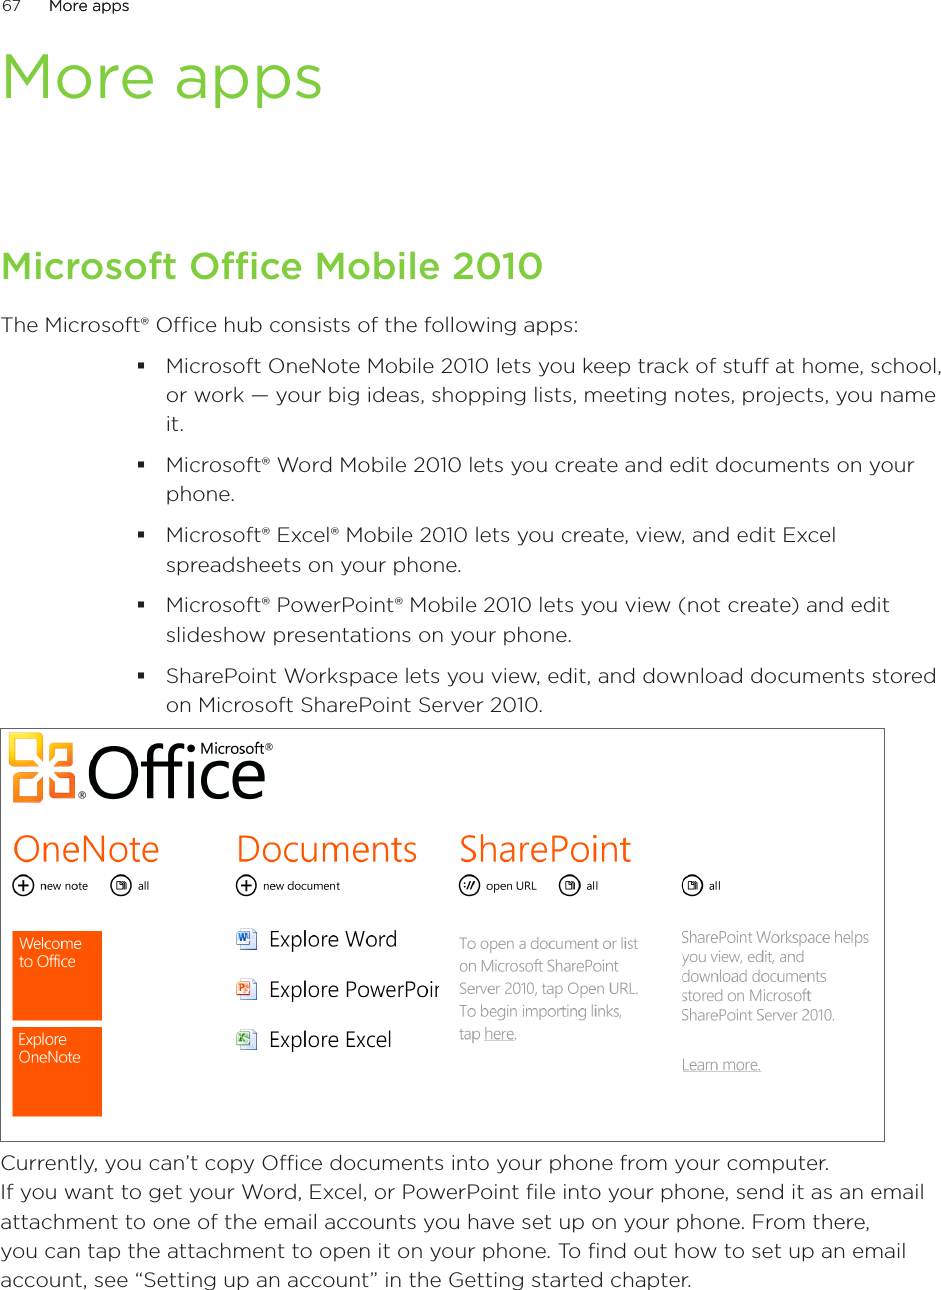 67      More appsMore apps      More appsMicrosoft Office Mobile 2010The Microsoft® Office hub consists of the following apps:Microsoft OneNote Mobile 2010 lets you keep track of stuff at home, school, or work — your big ideas, shopping lists, meeting notes, projects, you name it.Microsoft® Word Mobile 2010 lets you create and edit documents on your phone.Microsoft® Excel® Mobile 2010 lets you create, view, and edit Excel spreadsheets on your phone.Microsoft® PowerPoint® Mobile 2010 lets you view (not create) and edit slideshow presentations on your phone.SharePoint Workspace lets you view, edit, and download documents stored on Microsoft SharePoint Server 2010.Currently, you can’t copy Office documents into your phone from your computer.  If you want to get your Word, Excel, or PowerPoint file into your phone, send it as an email attachment to one of the email accounts you have set up on your phone. From there, you can tap the attachment to open it on your phone. To find out how to set up an email account, see “Setting up an account” in the Getting started chapter. 